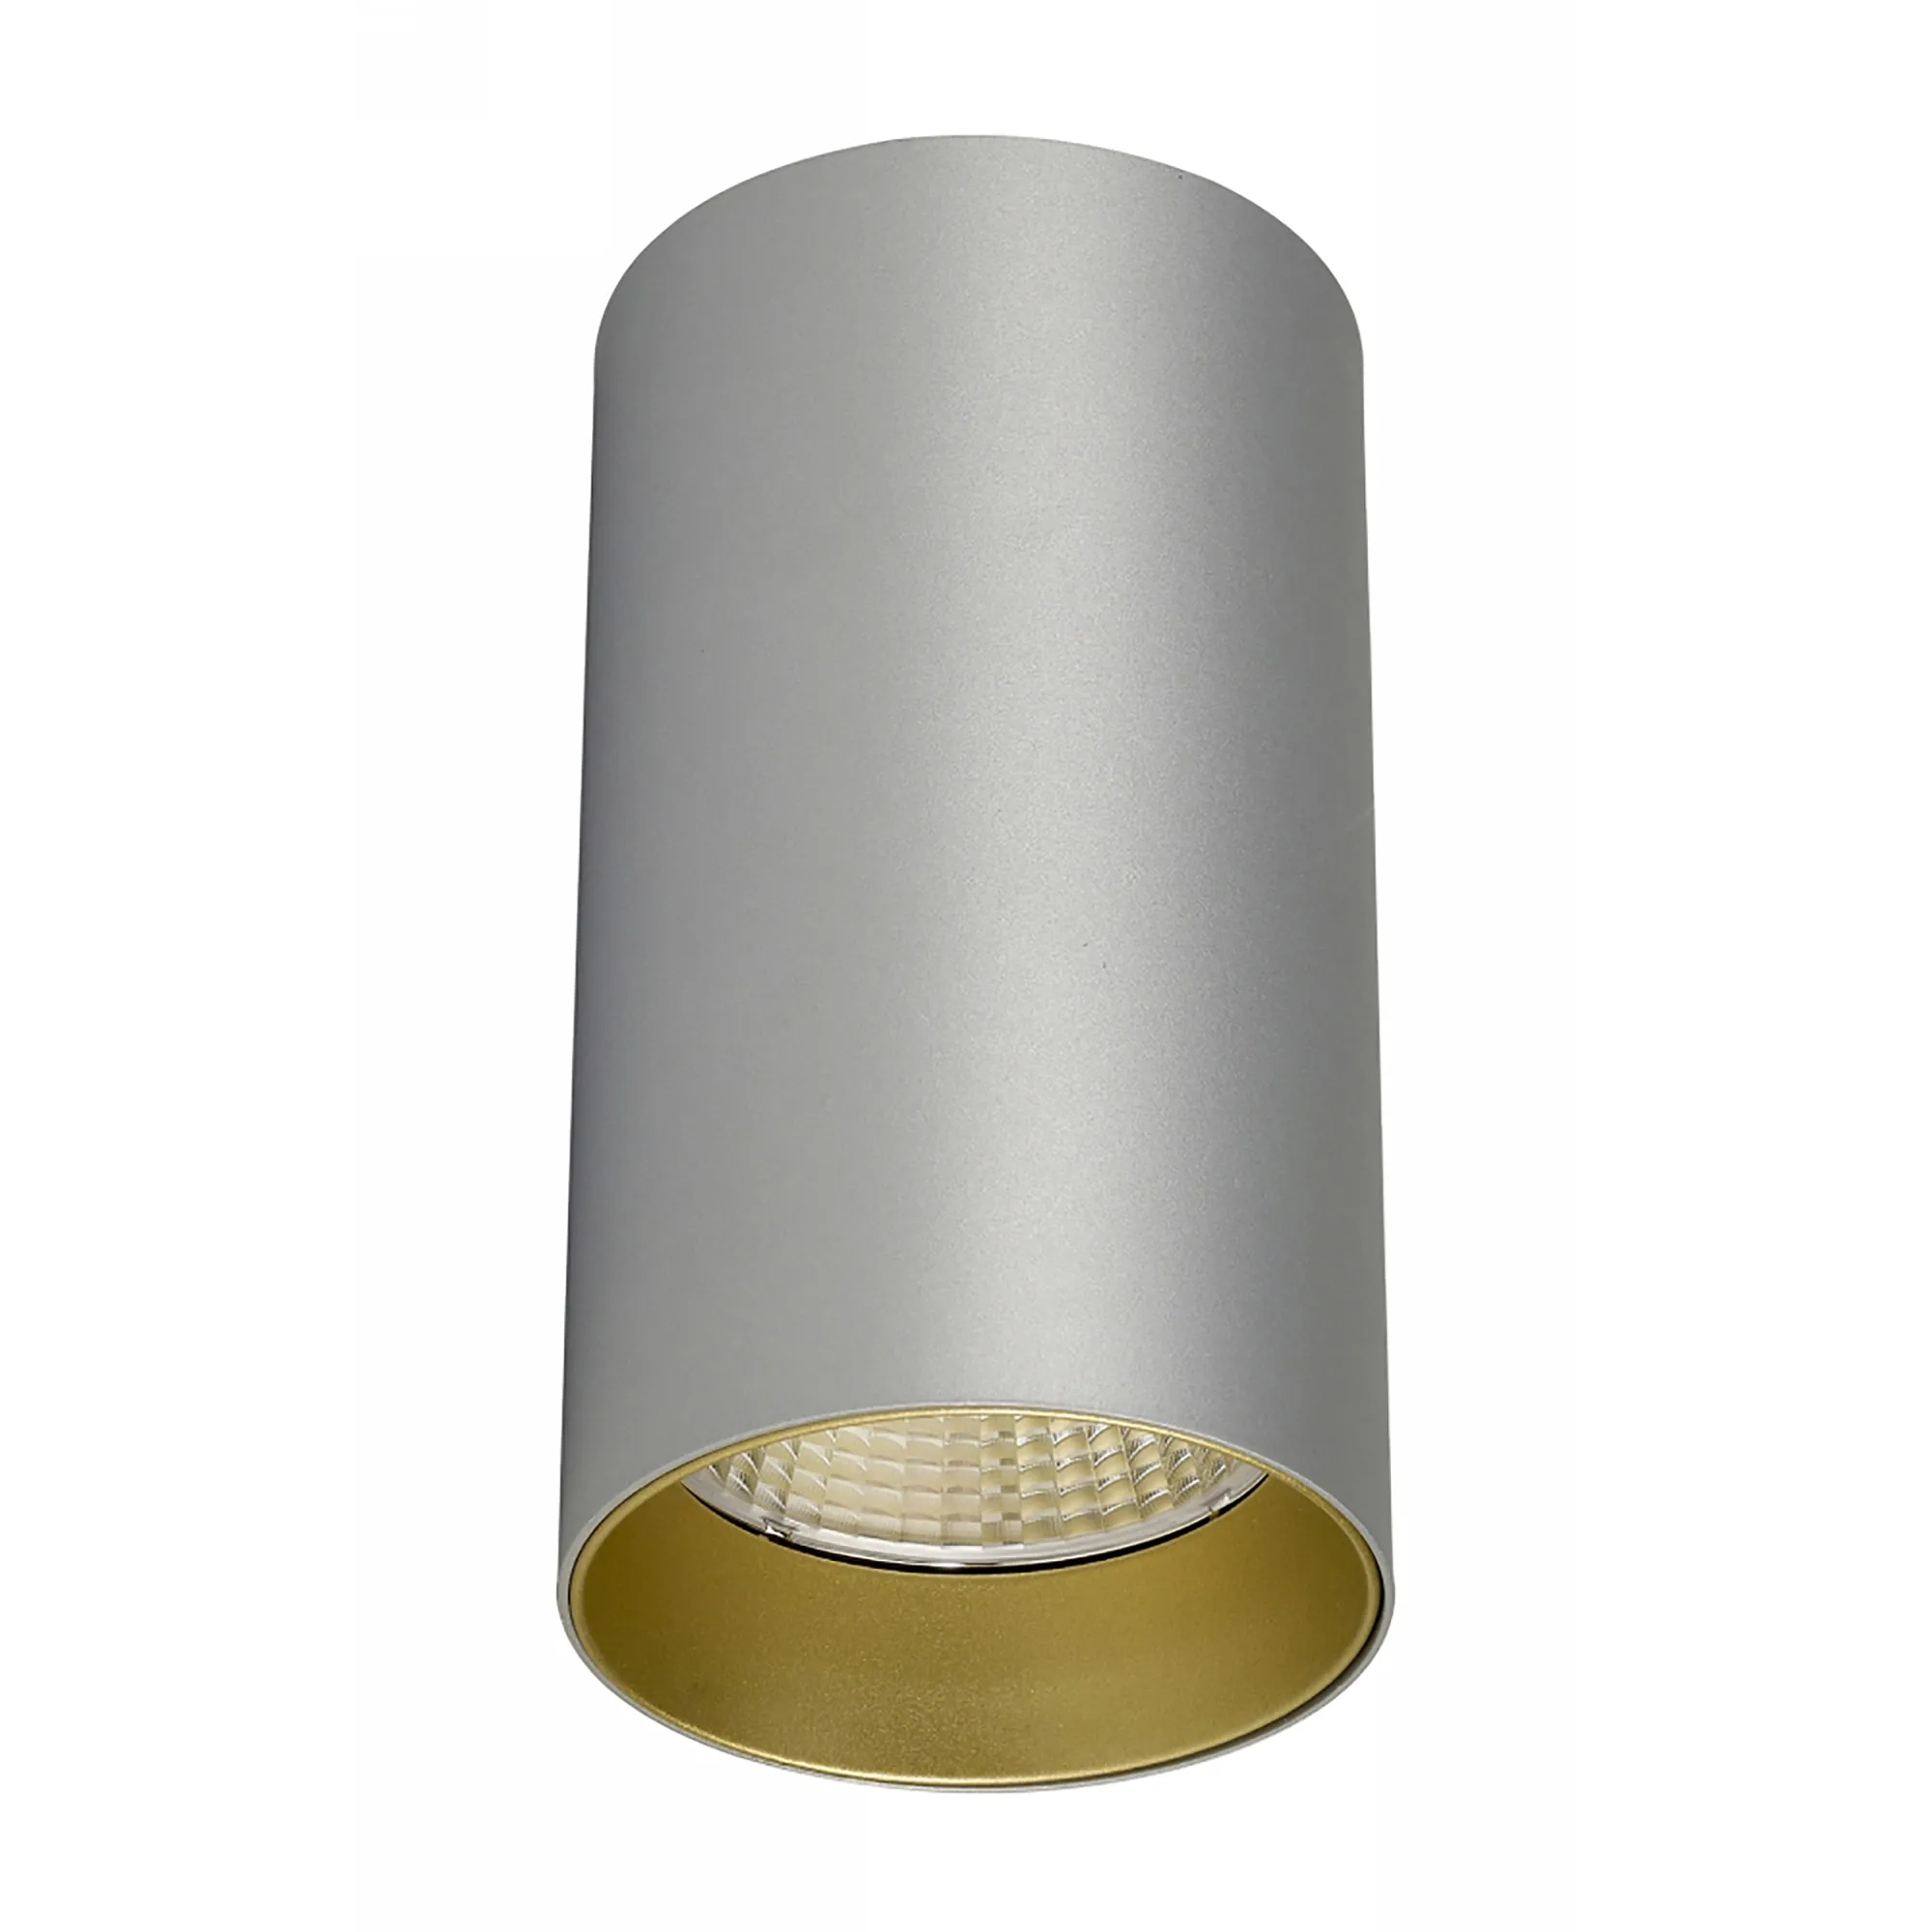 DL300017  Eos 15 15W Silver & Gold Surface LED Spotlight 1180lm 25° 2700K IP20